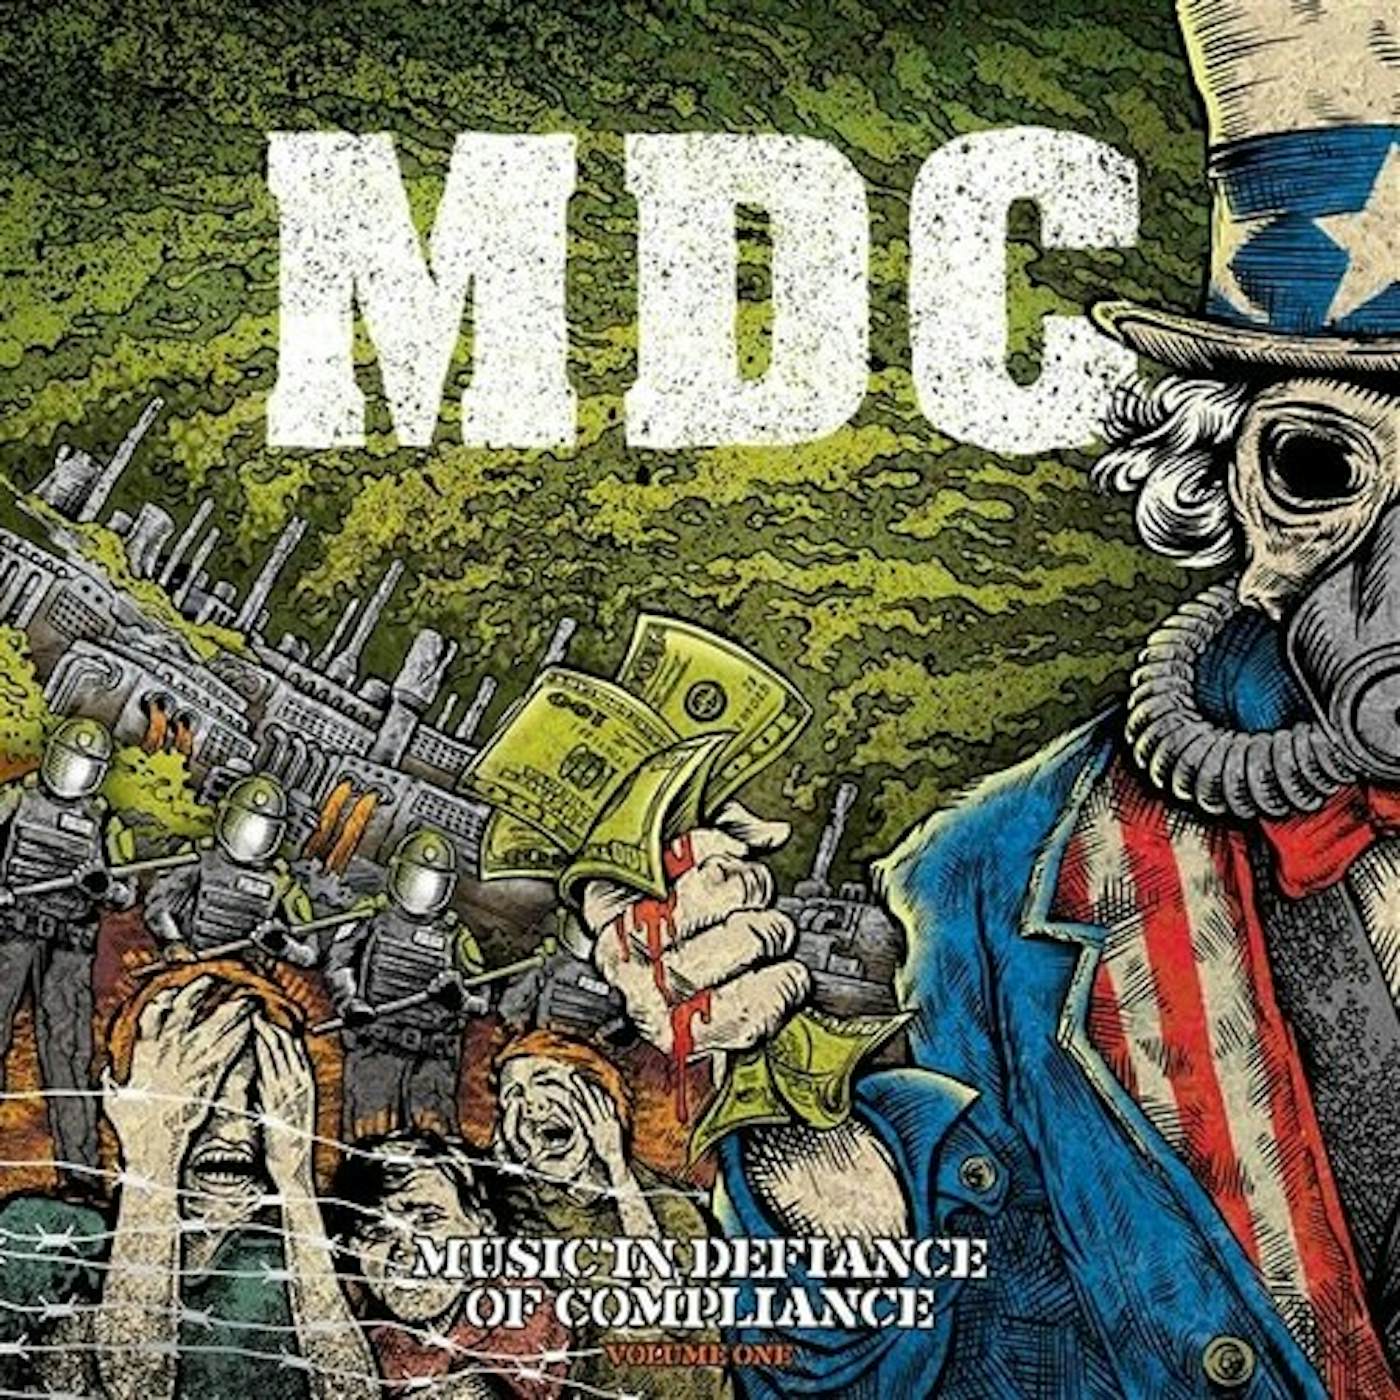 MDC MUSIC IN DEFIANCE OF COMPLIANCE - VOLUME ONE Vinyl Record